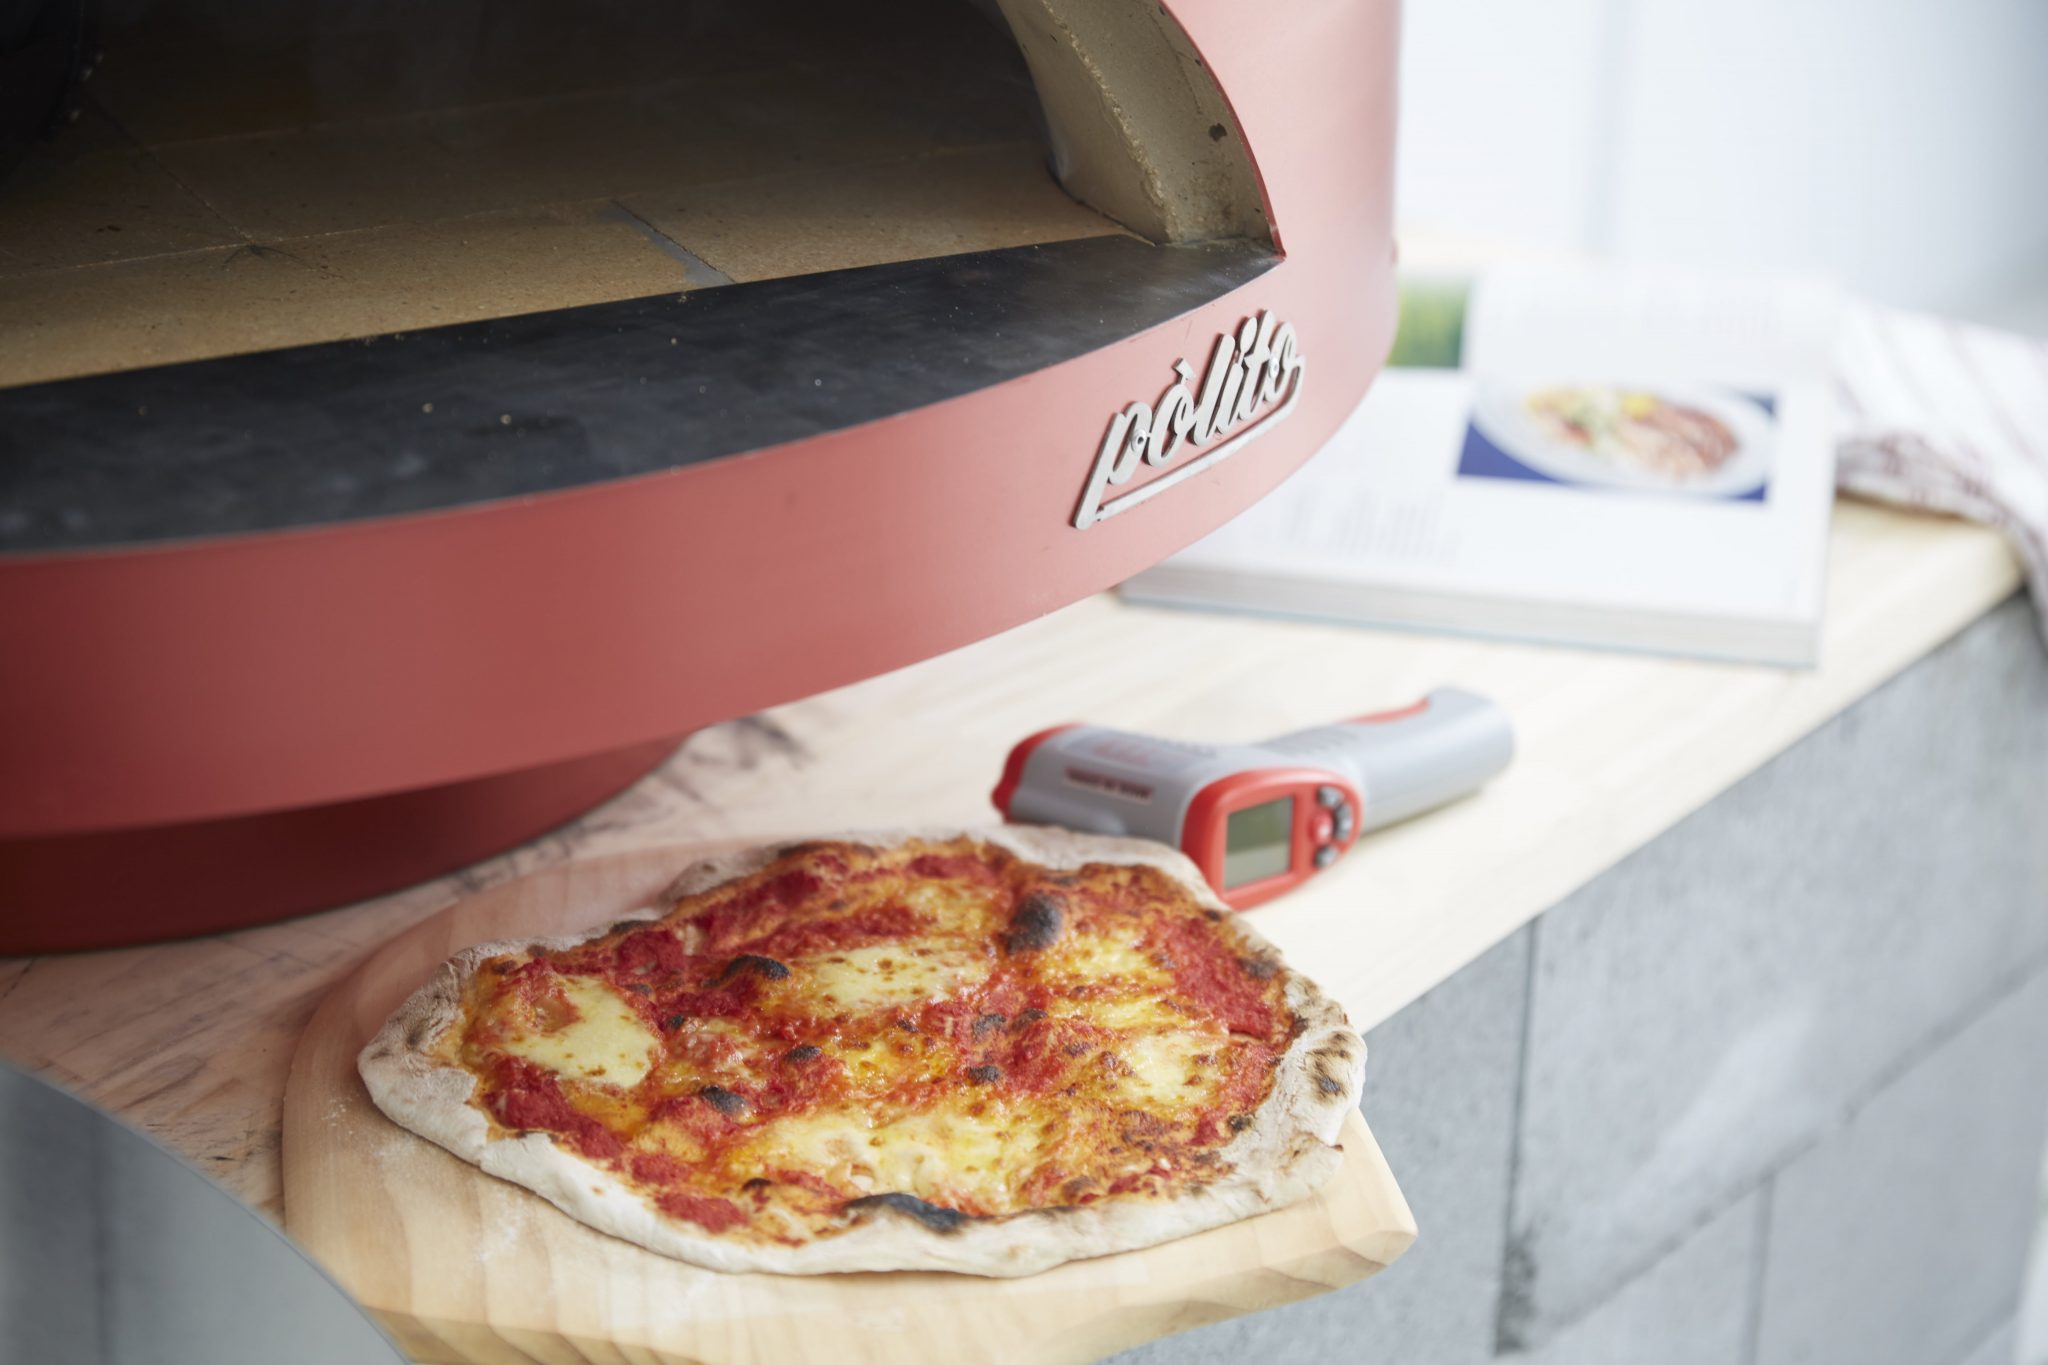 The Giotto – Polito Wood Fired Ovens